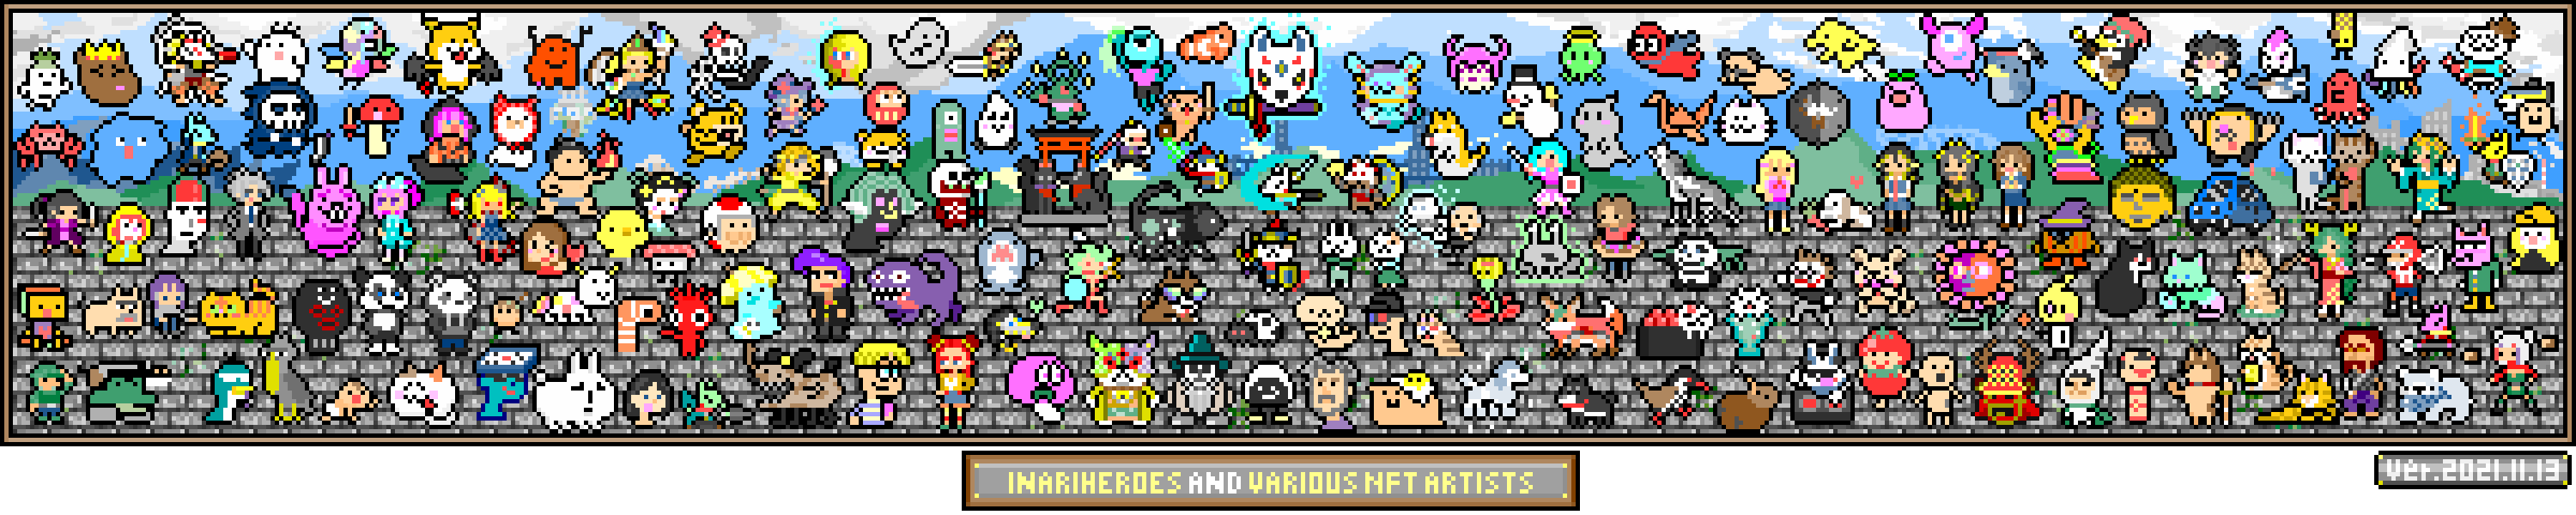 INARIHeroes and Various NFT Artists ver.2021.11.13